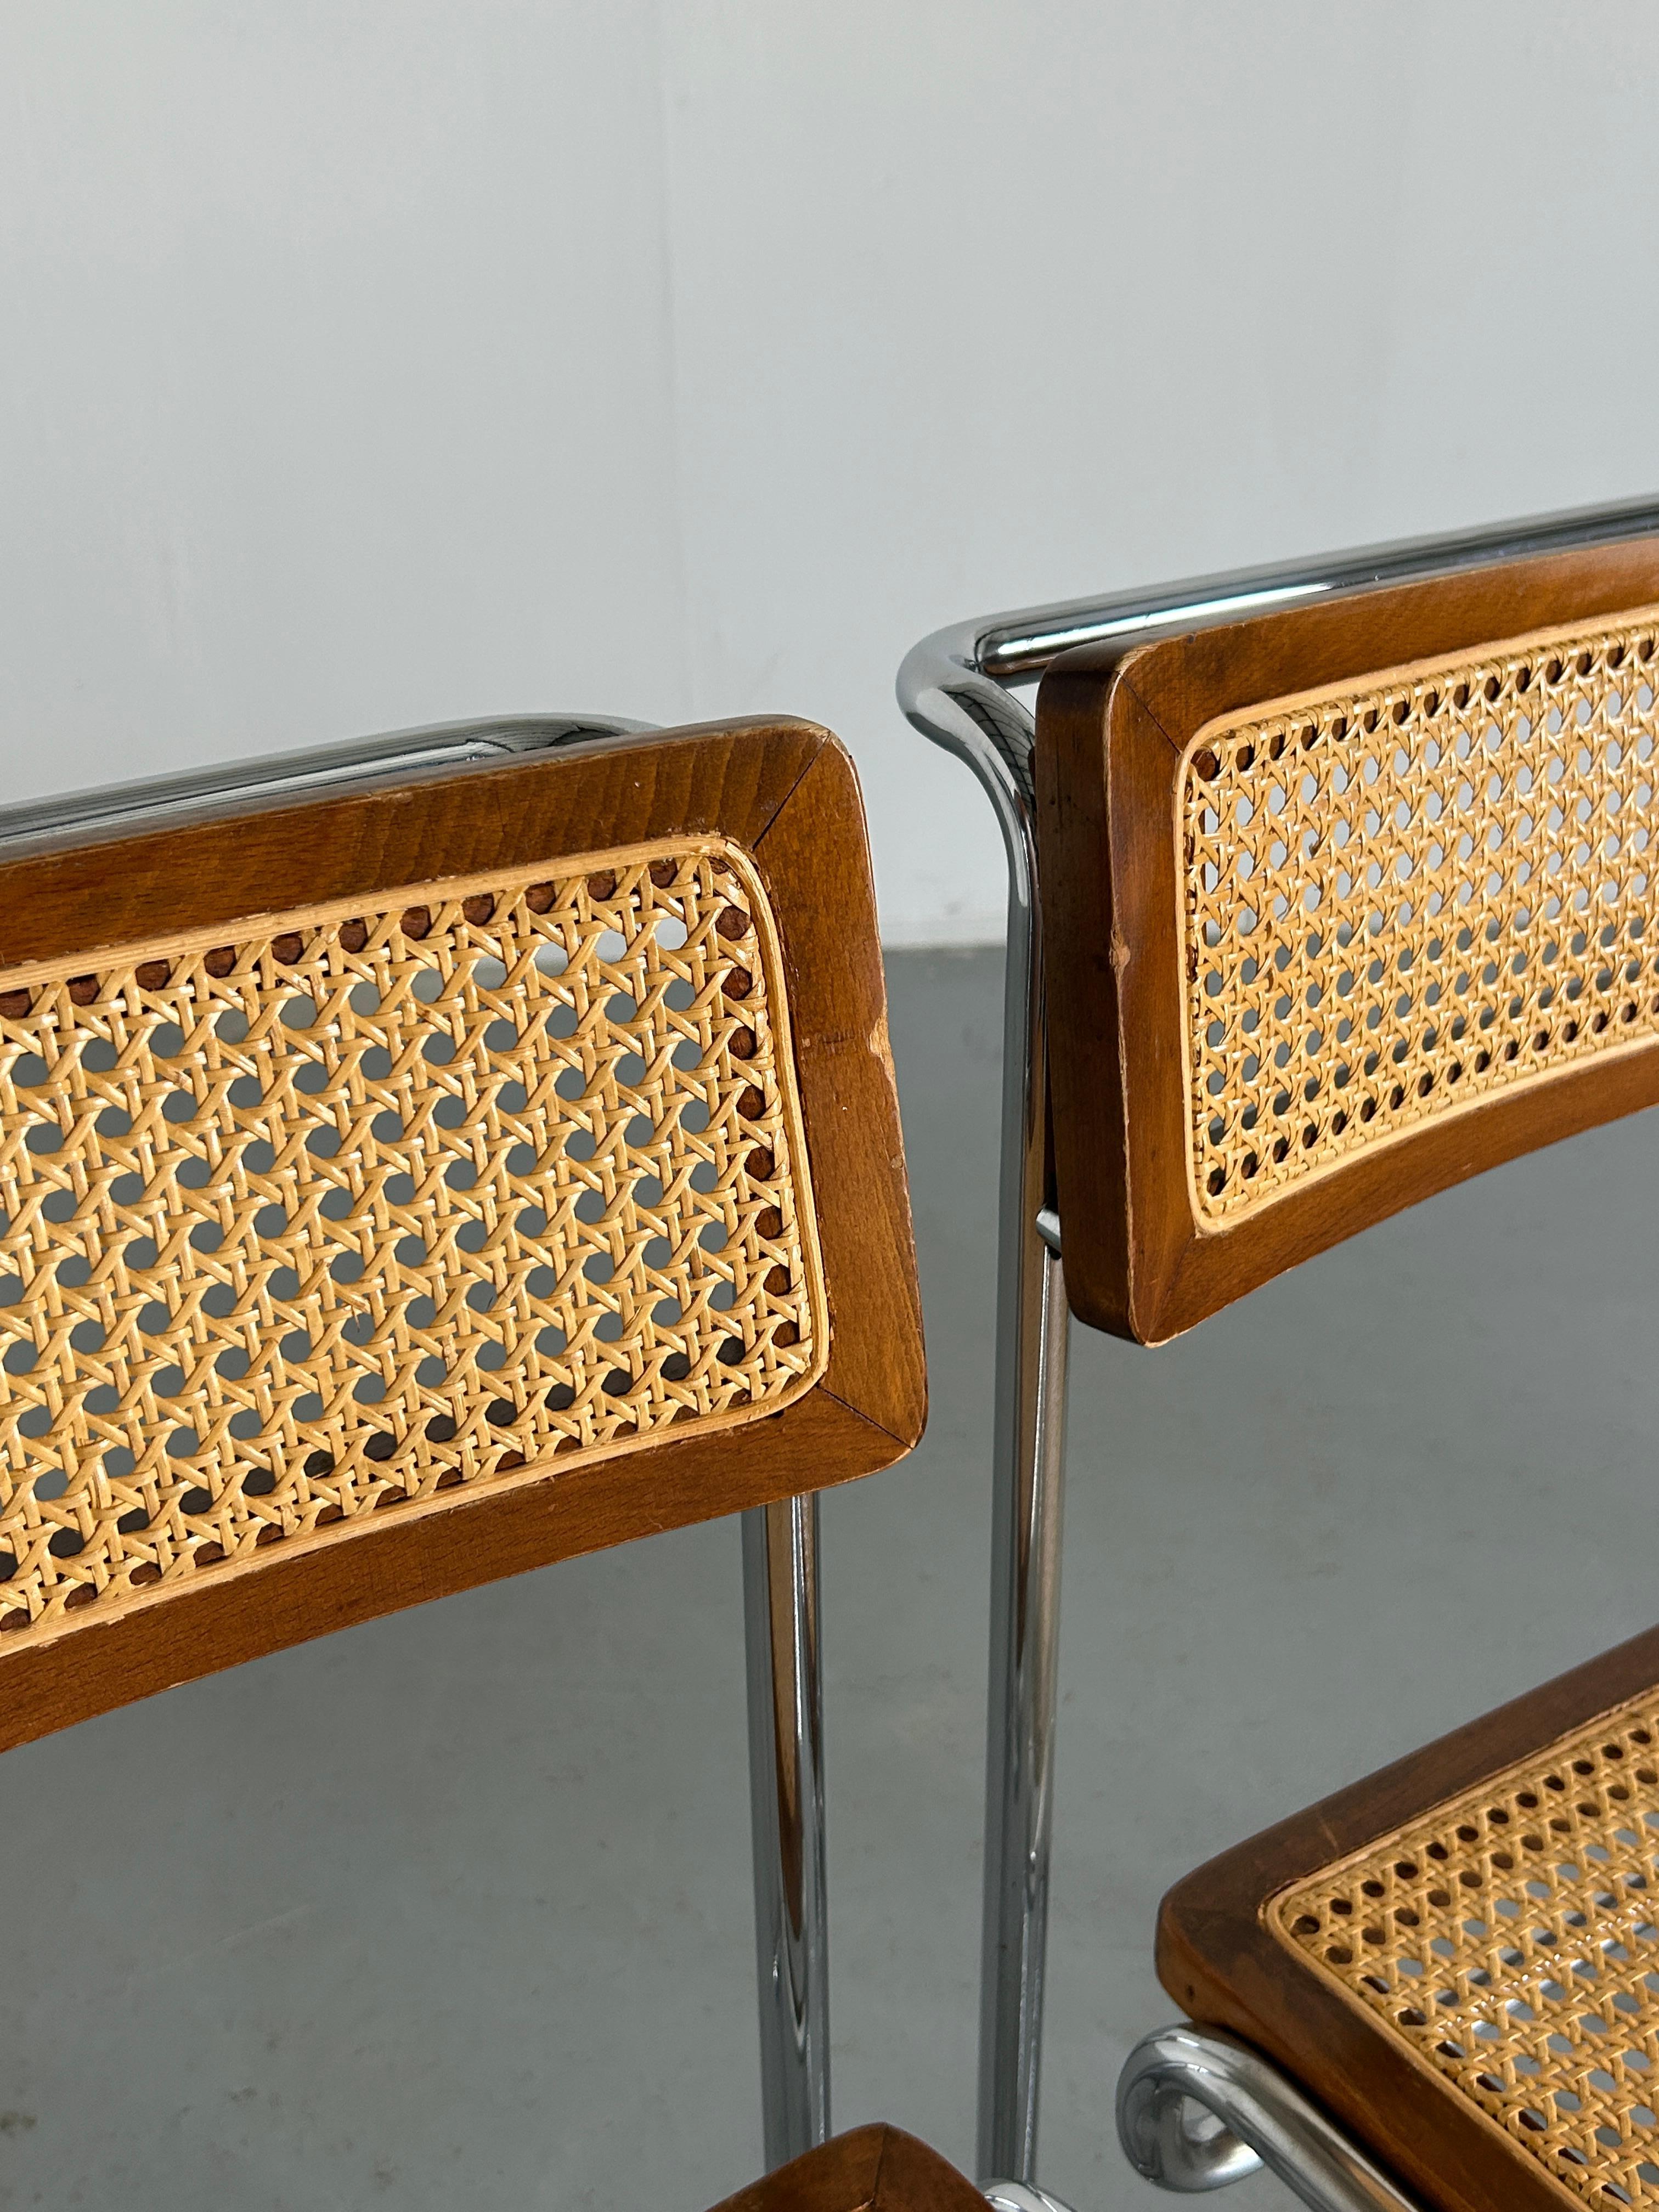 Set of 4 Mid-Century Dining Chairs in Bent Tubular Steel and Wicker Cane, 1960s For Sale 7